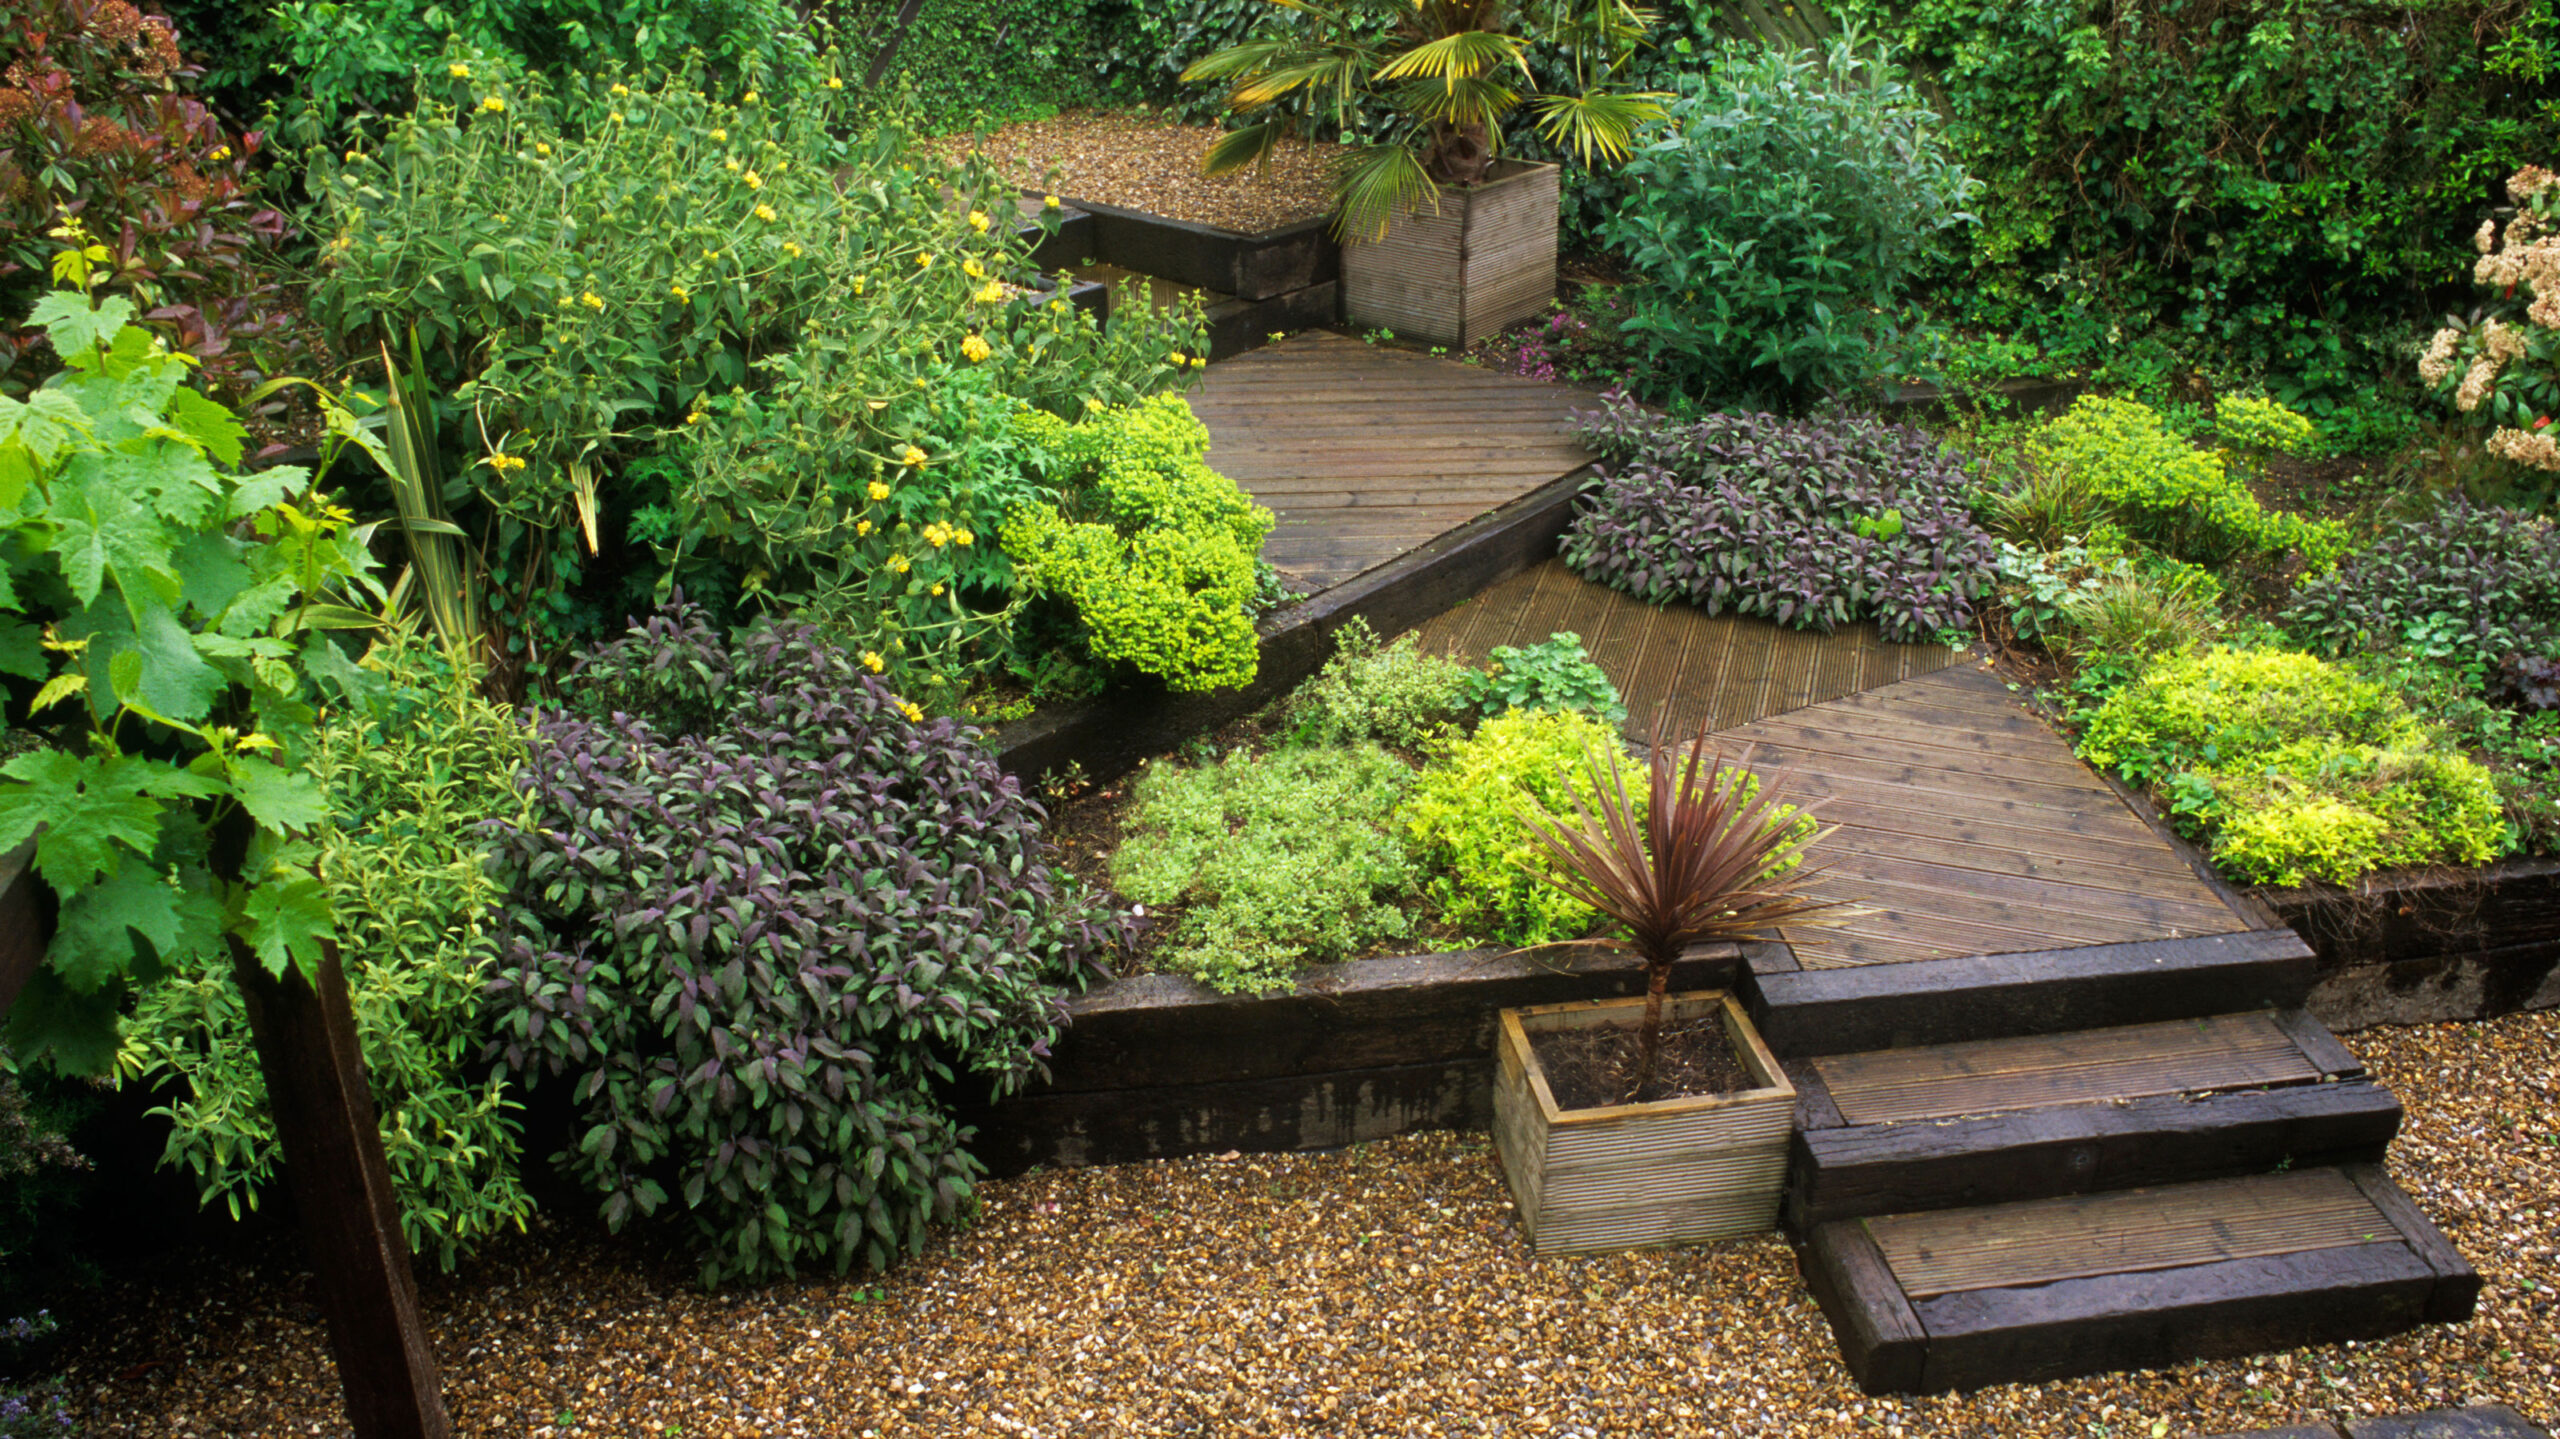 Create a Rustic Garden Feature with Railroad Ties